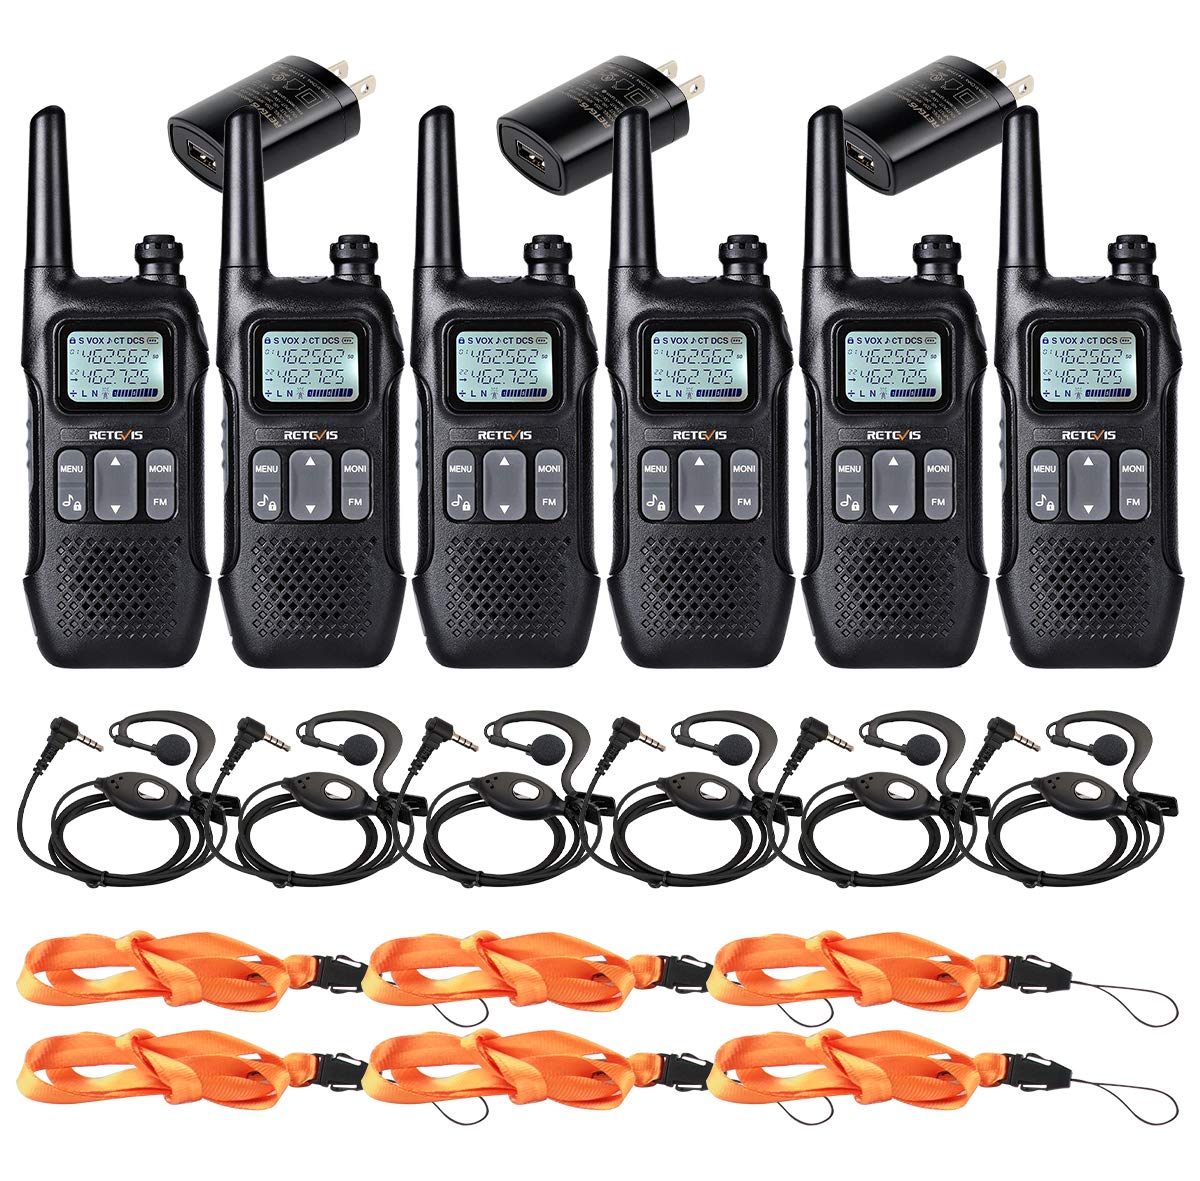 Retevis RT16 Walkie Talkies with Earpieces,Two Way Radios Long Range Rechargeable Dual Watch Emergency Flashlight NOAA VOX,2 Way Radio for Business Retail Hotel(6 Pack)